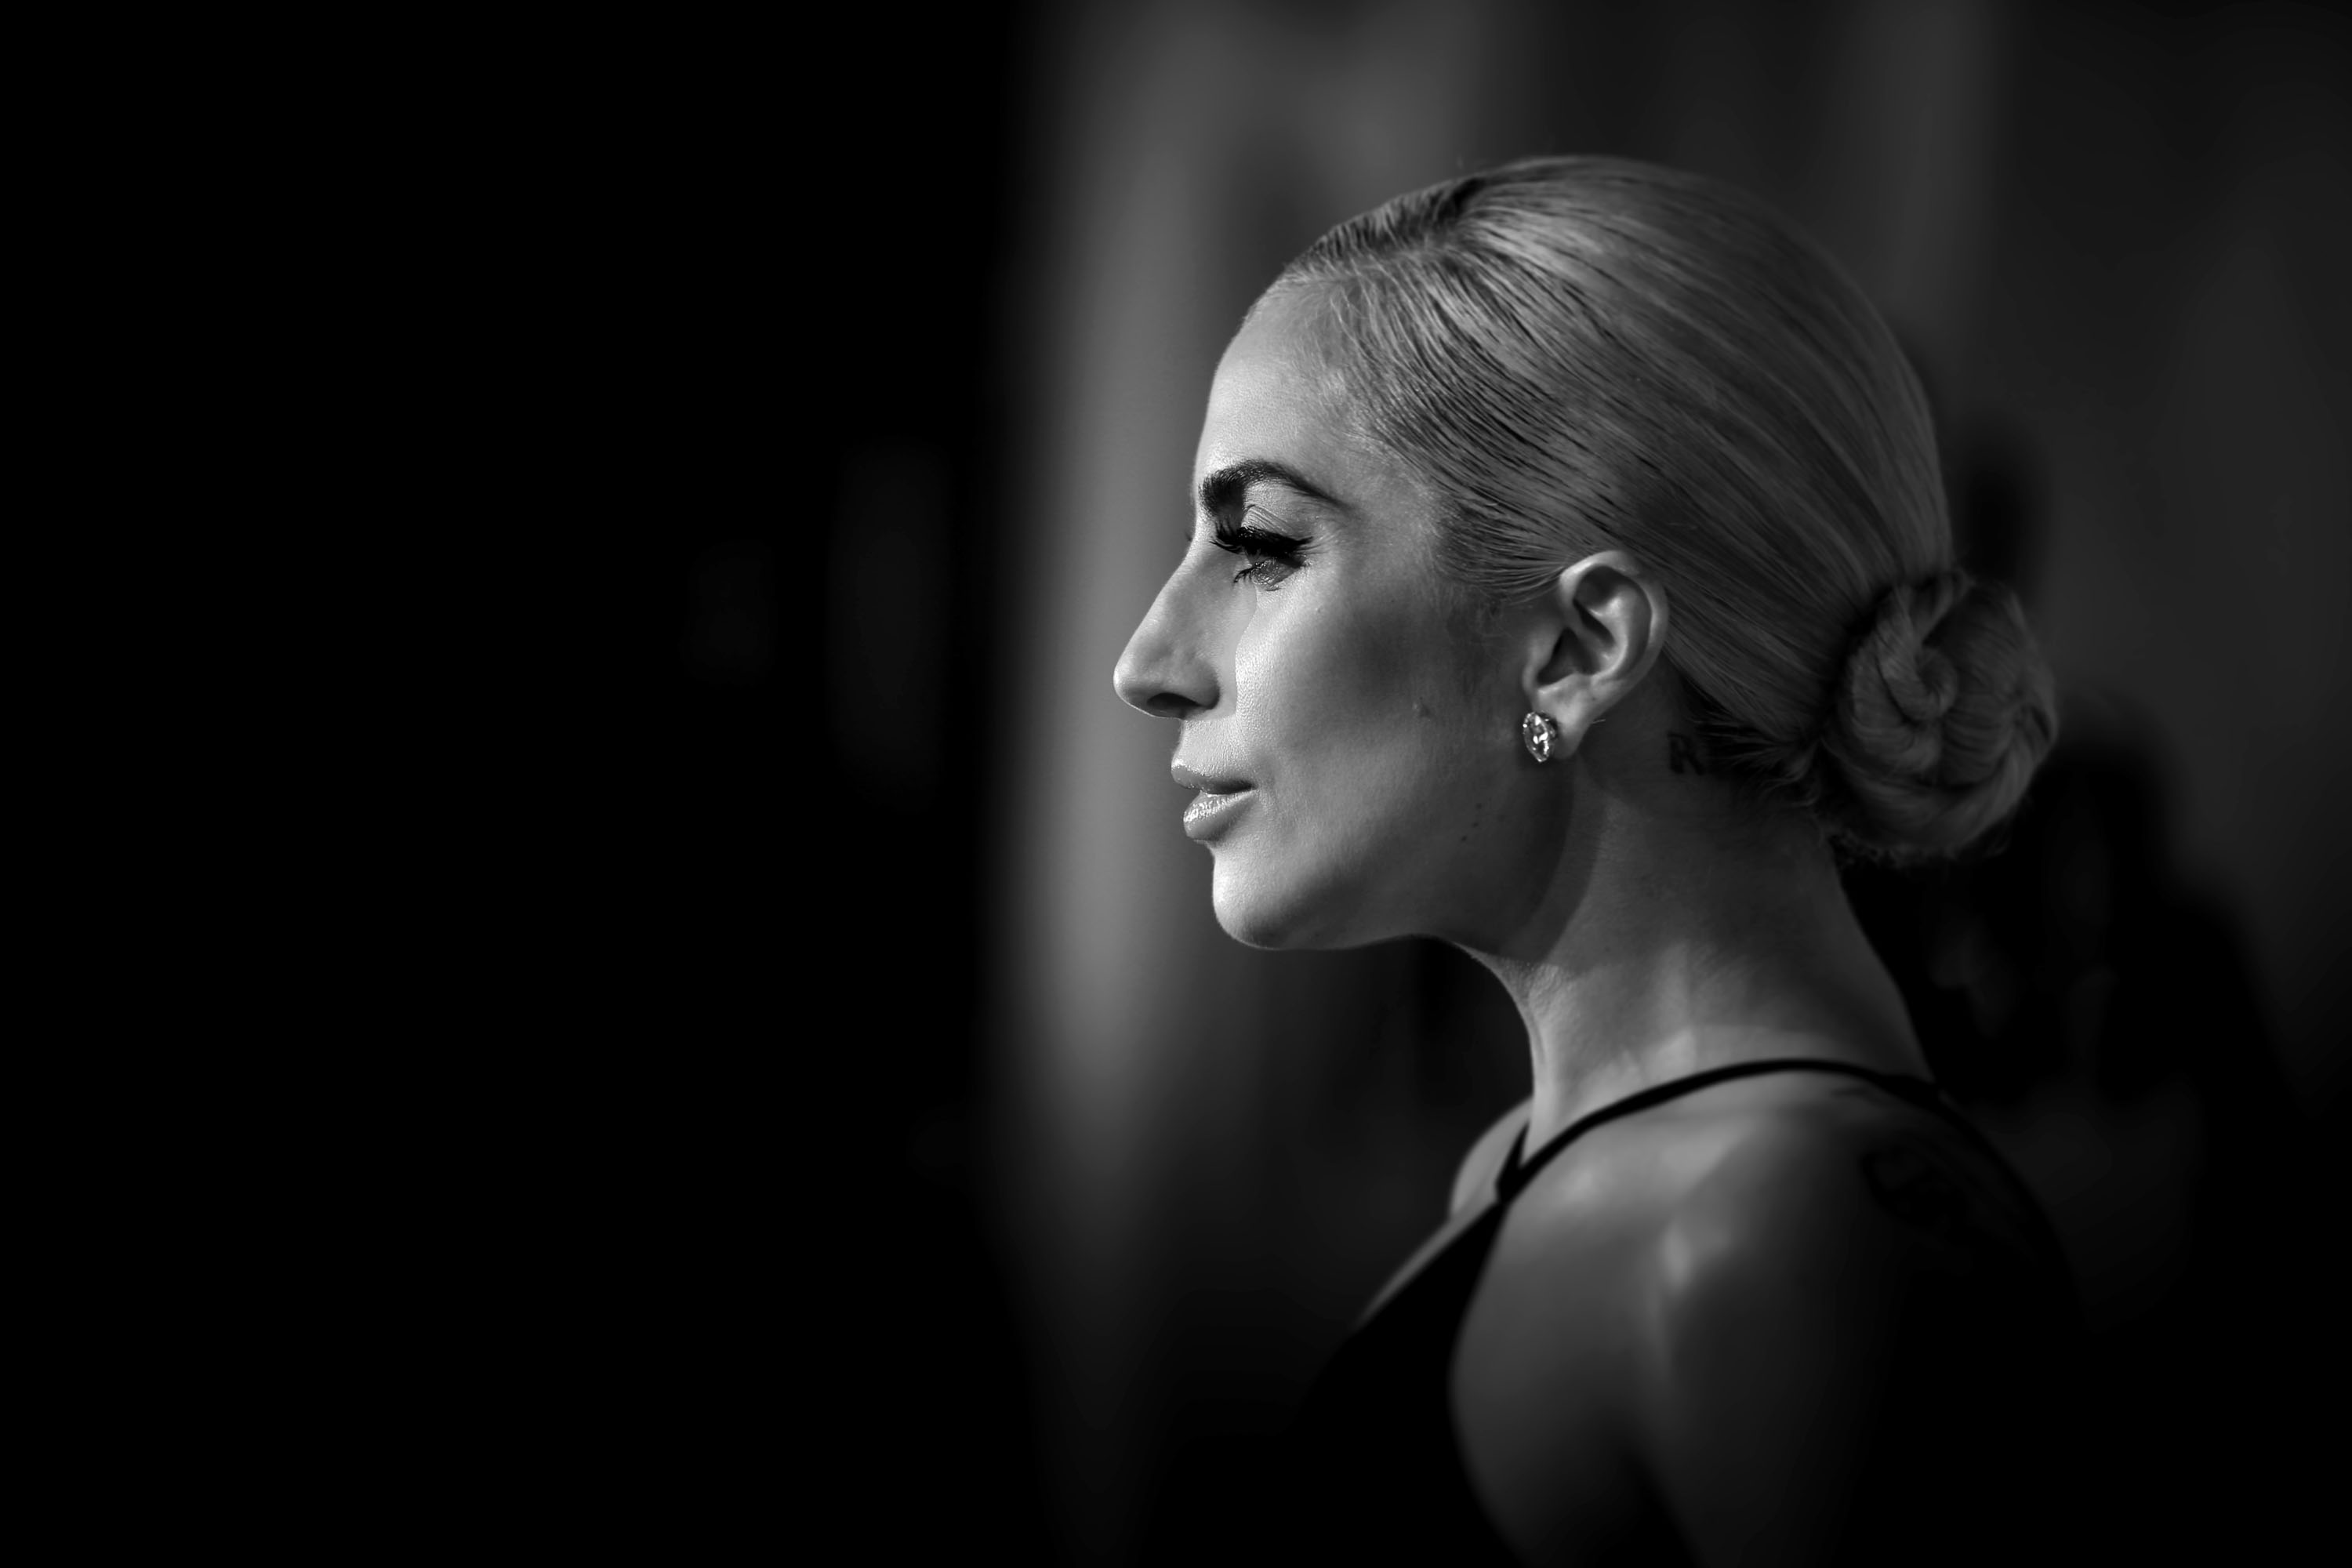 Lady Gaga attends The Fashion Awards 2016 on December 5, 2016 in London, United Kingdom. (Mike Marsland—WireImage/Getty Images)